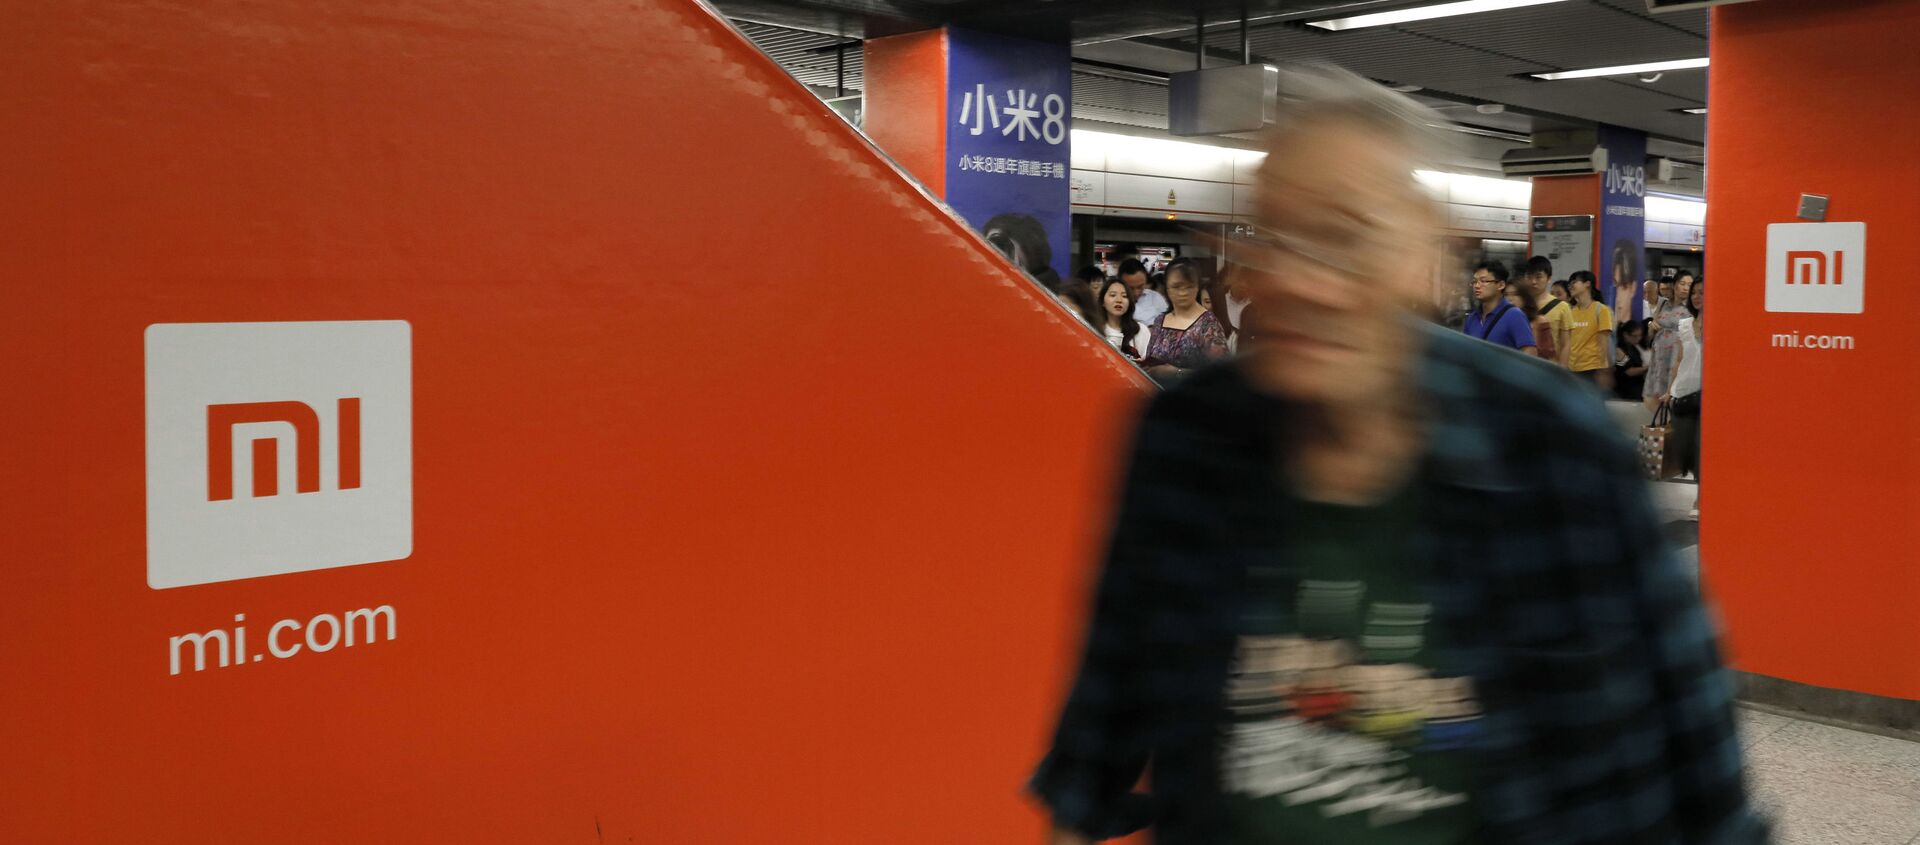 An advertisement for Xiaomi is displayed at a subway station in Hong Kong, 9 July 2018 - Sputnik International, 1920, 19.03.2021